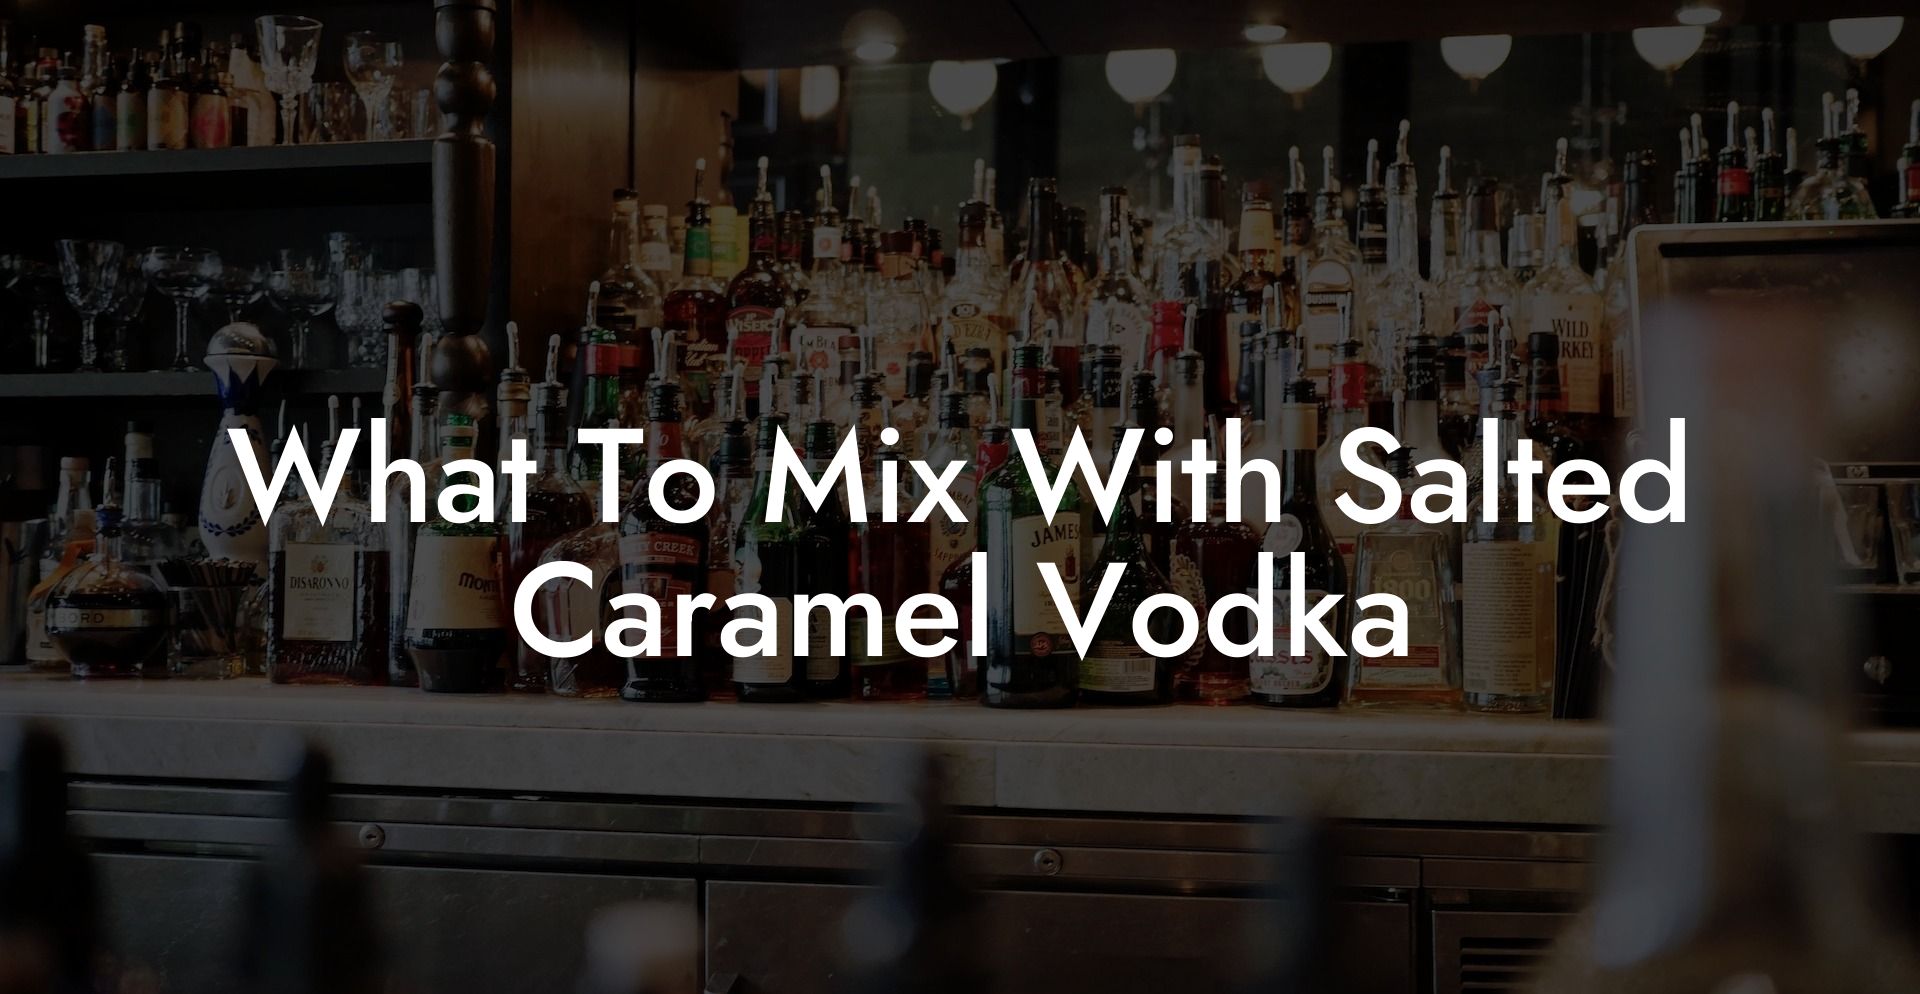 What To Mix With Salted Caramel Vodka